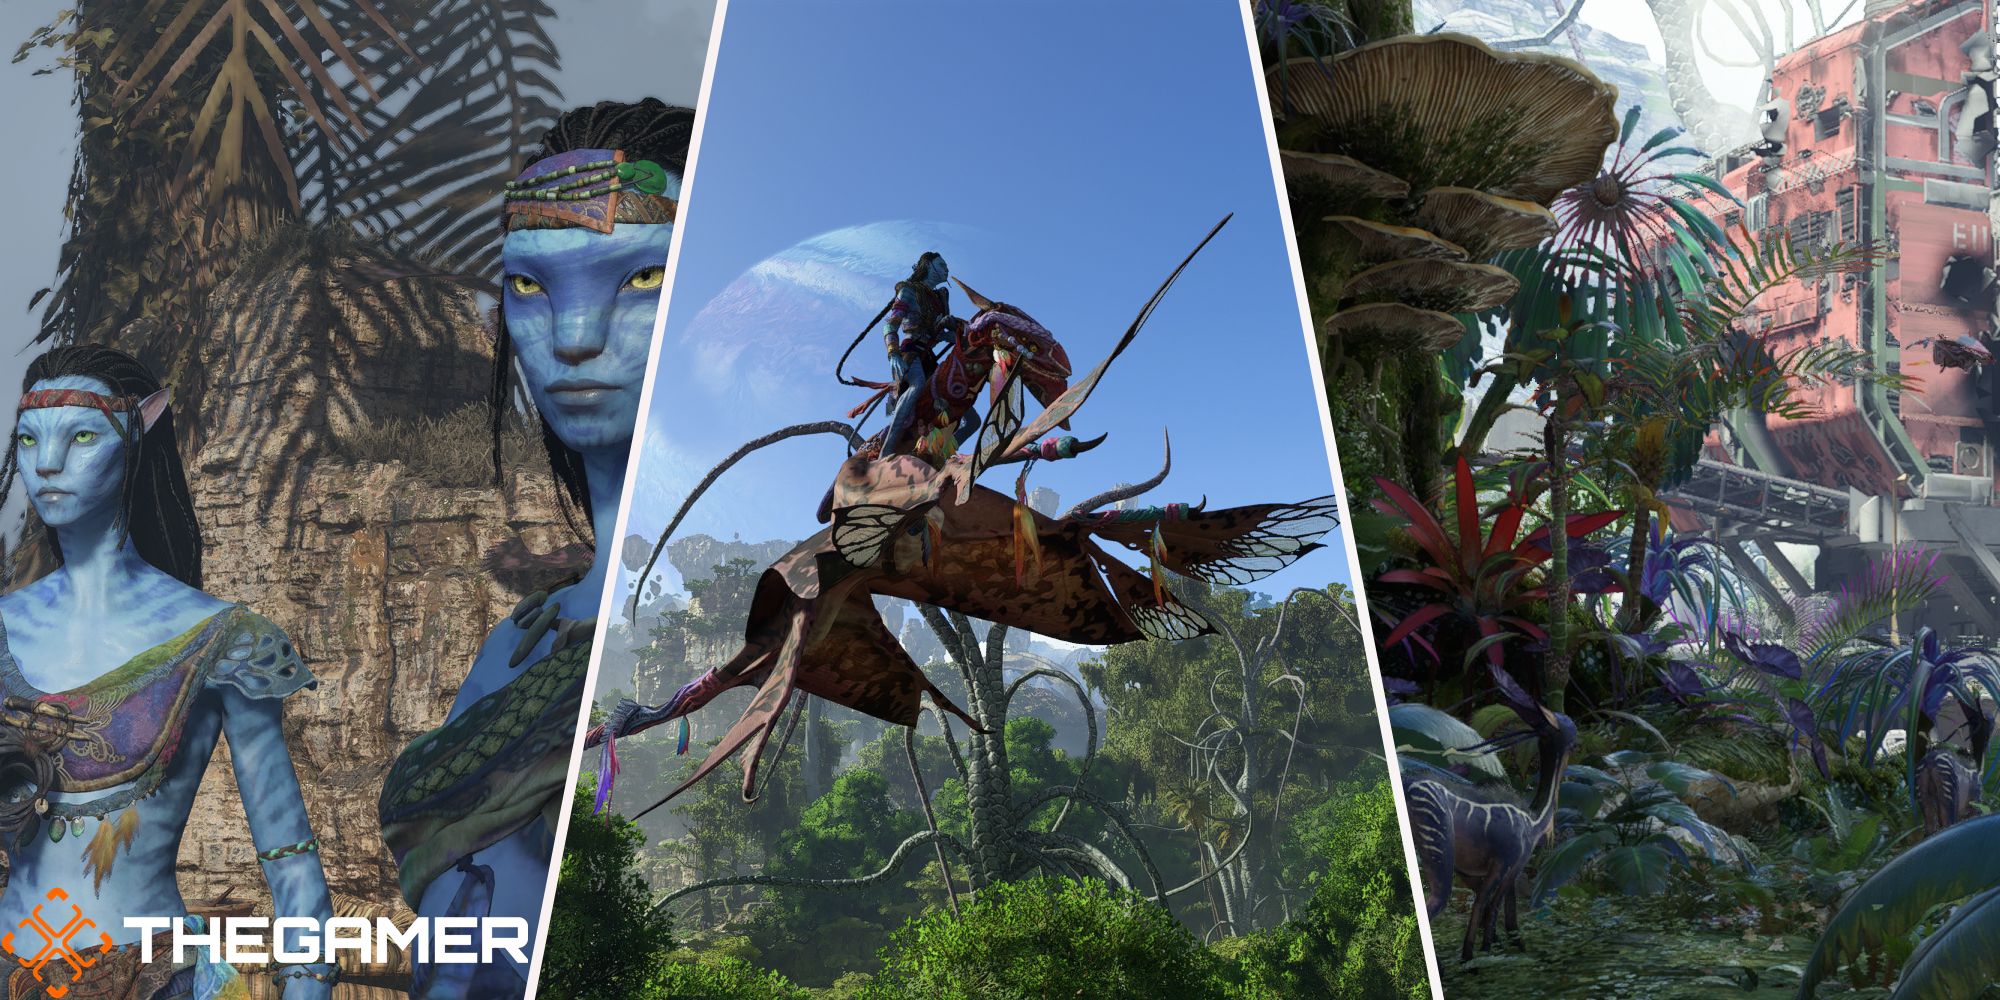 Avatar Frontiers Of Pandora combined images of Na'vi, ikran, and an RDA facility